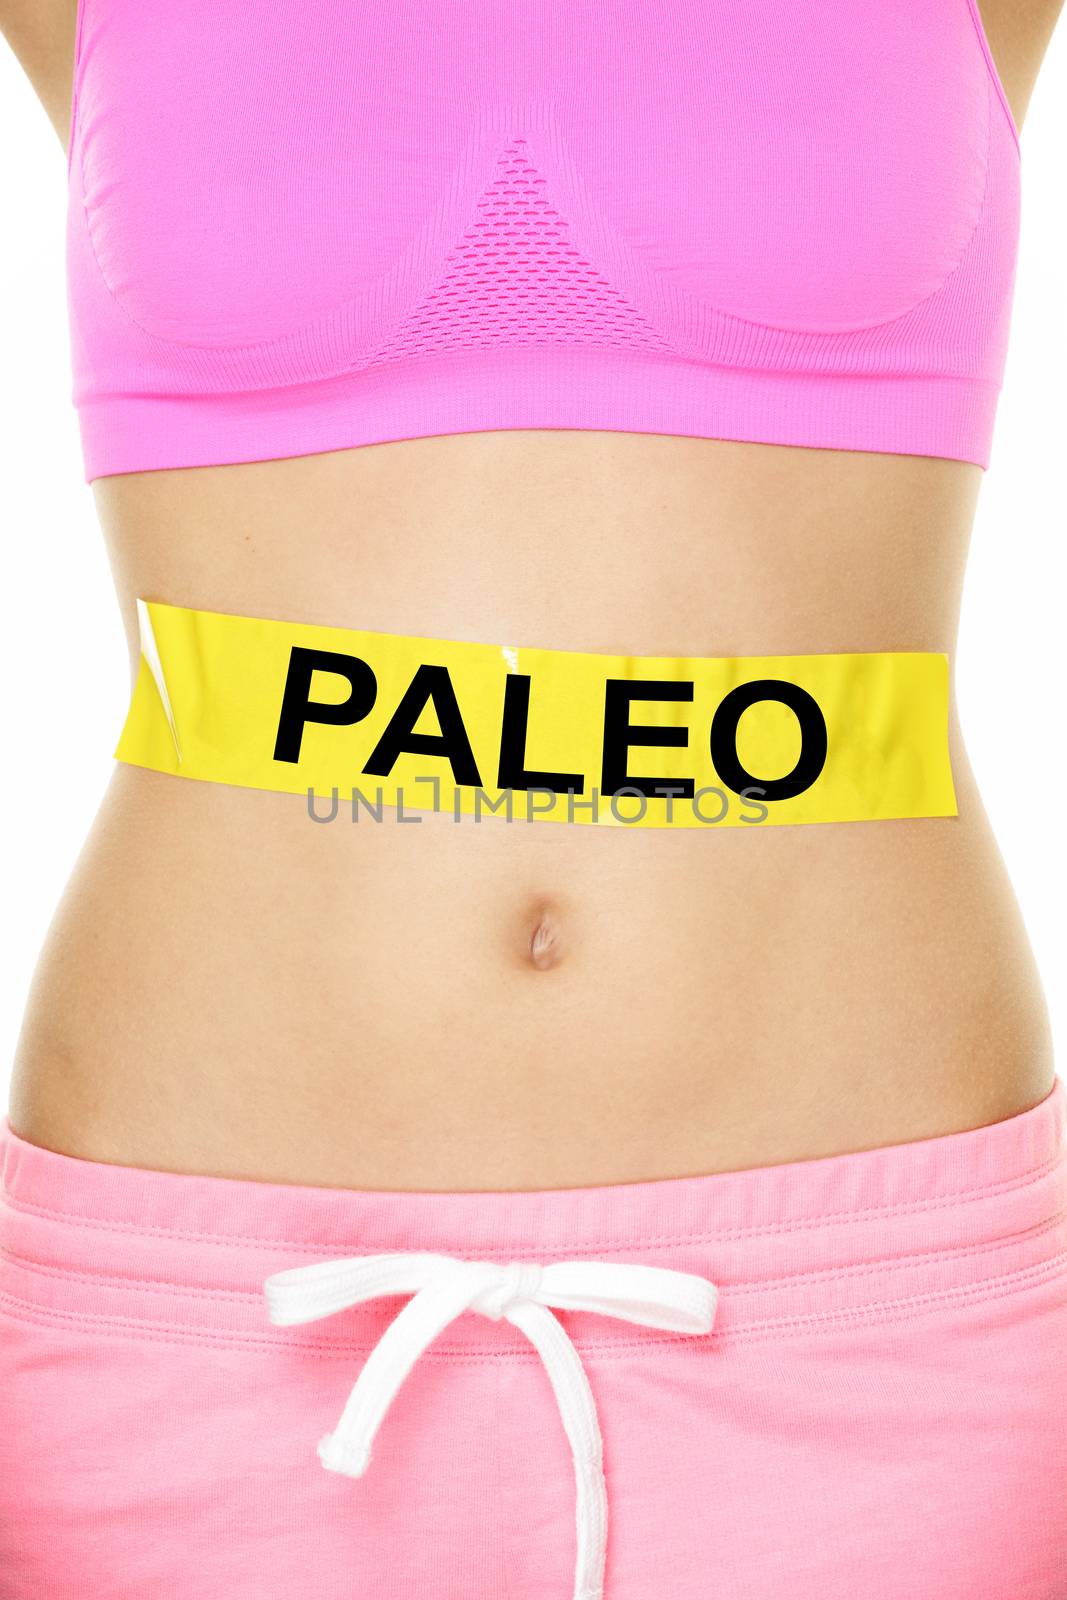 Paleo diet concept - closeup of woman's stomach to show eating concept. New trend in nutrition based on hunter gatherer consumption of proteins. Yellow label as warning or caution applied on body.